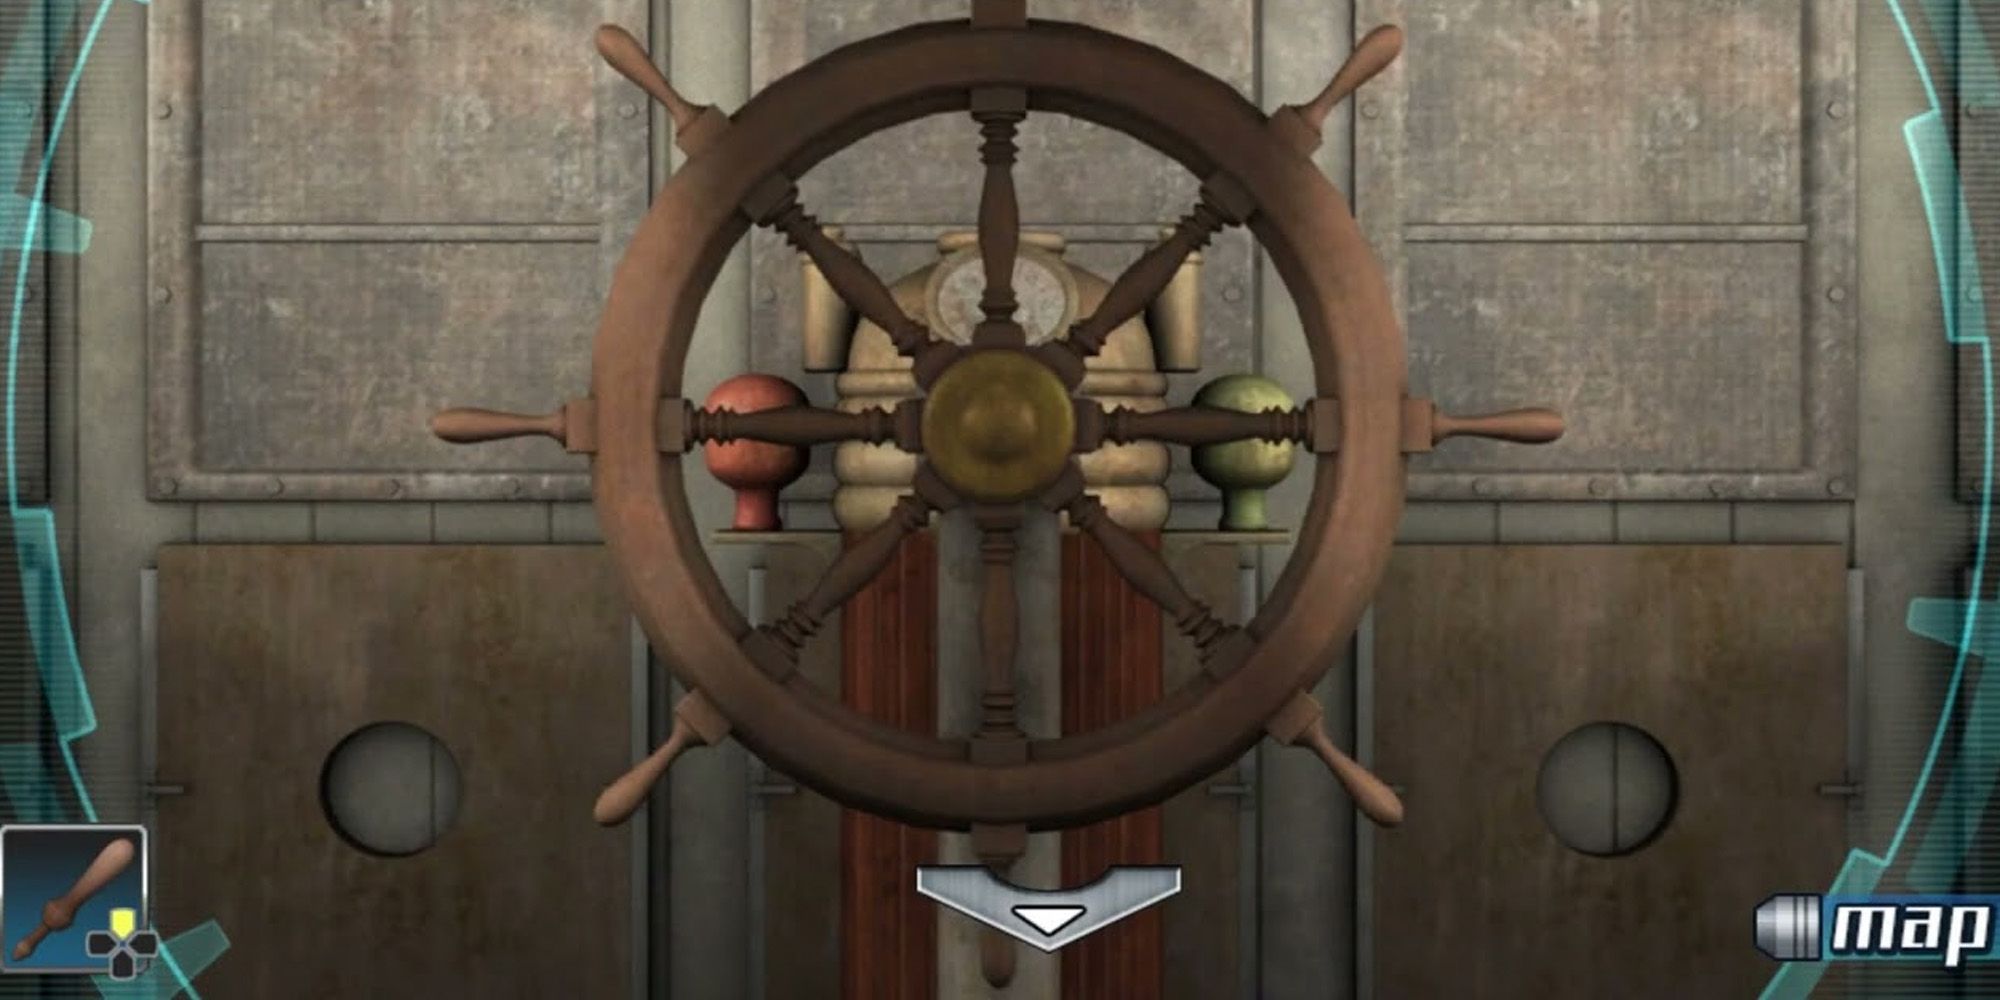 The Steering Wheel In The Chart Room That The Player Interacts With To Begin The First Puzzle